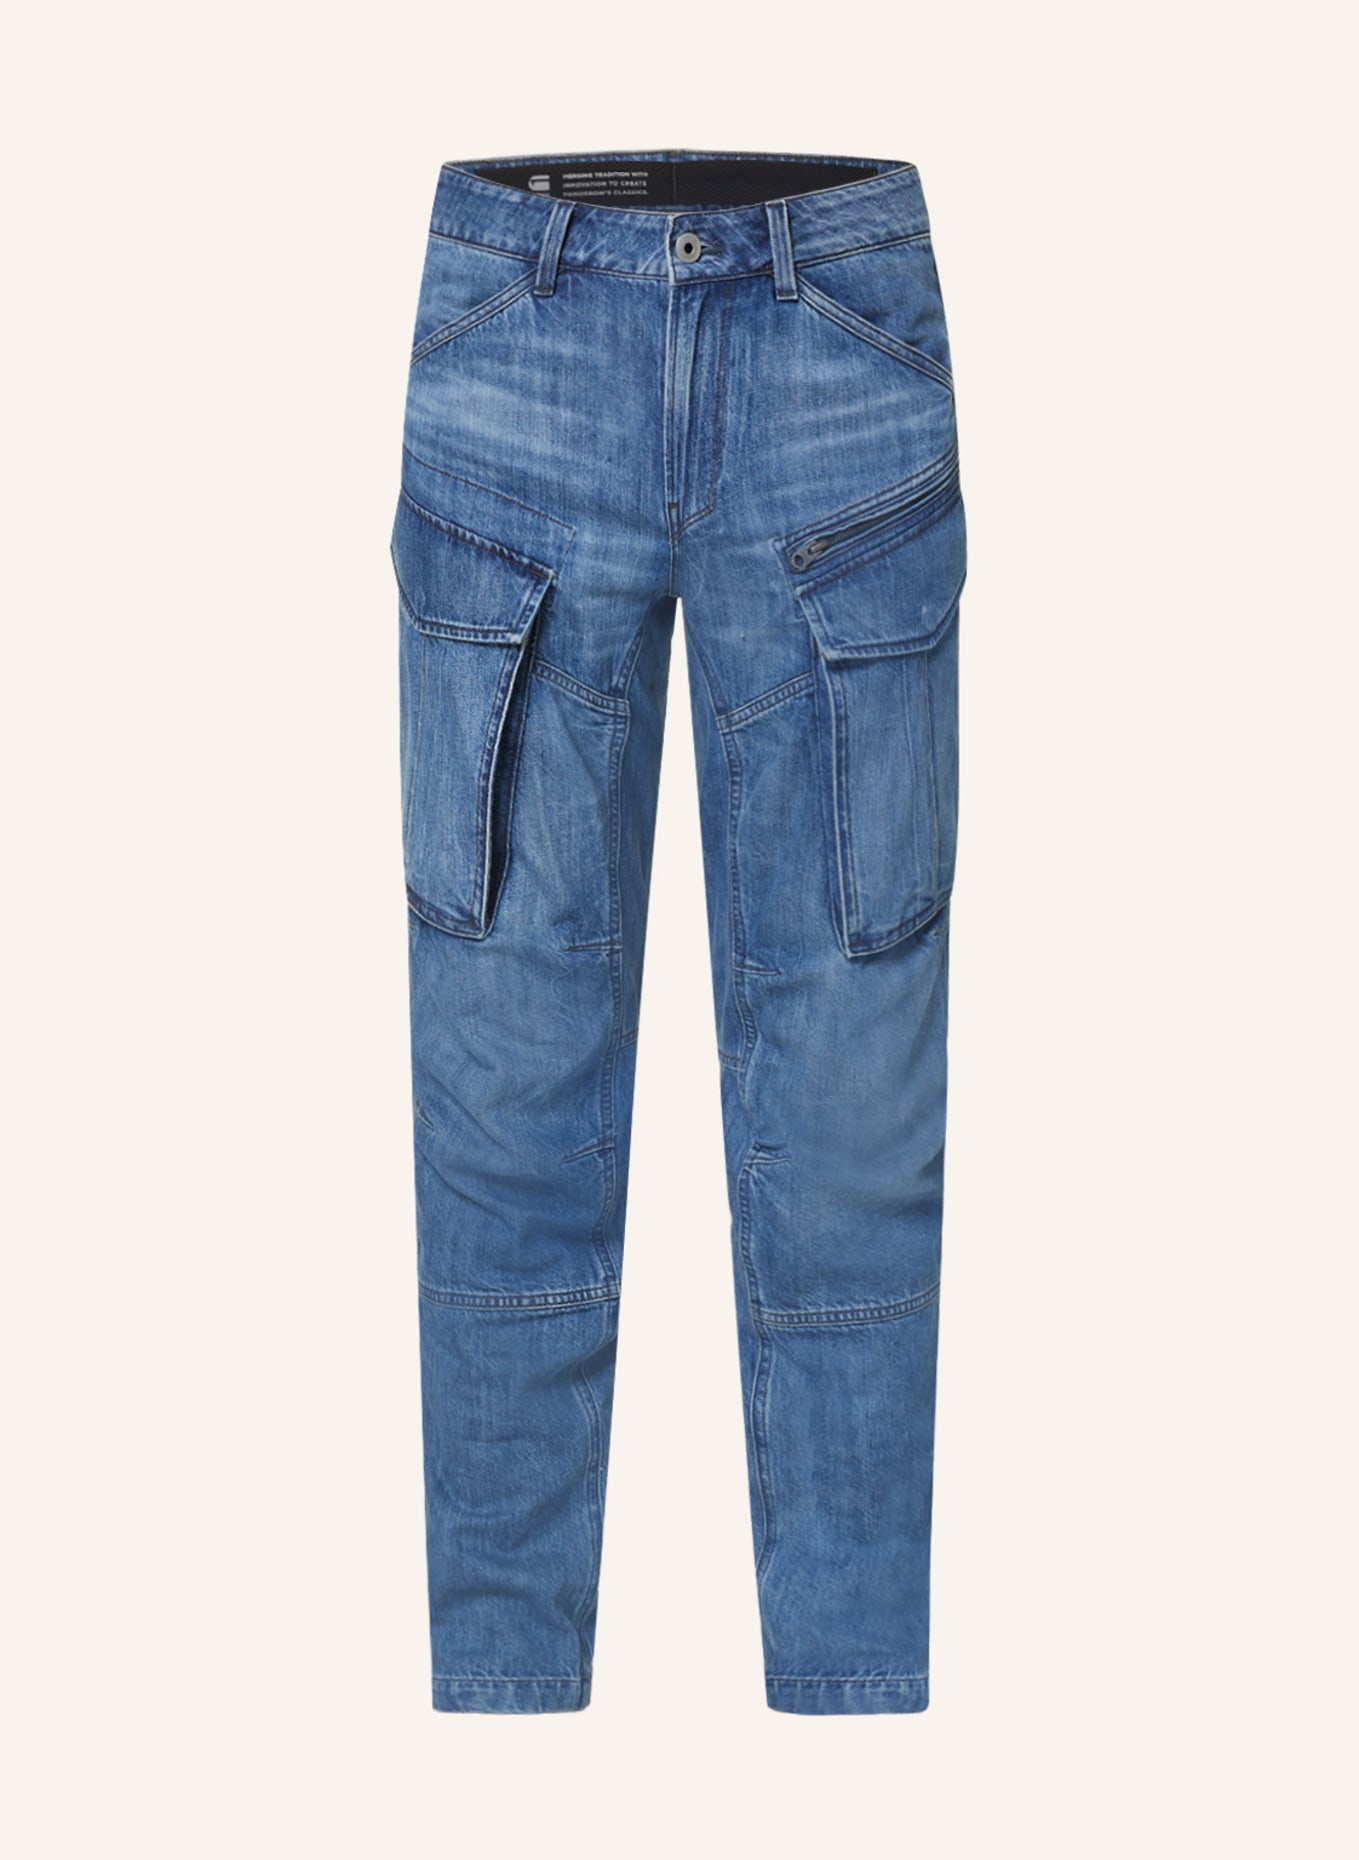 G-Star RAW Jeans Straight Tapered Fit, Farbe: G326 faded cliffside blue (Bild 1)